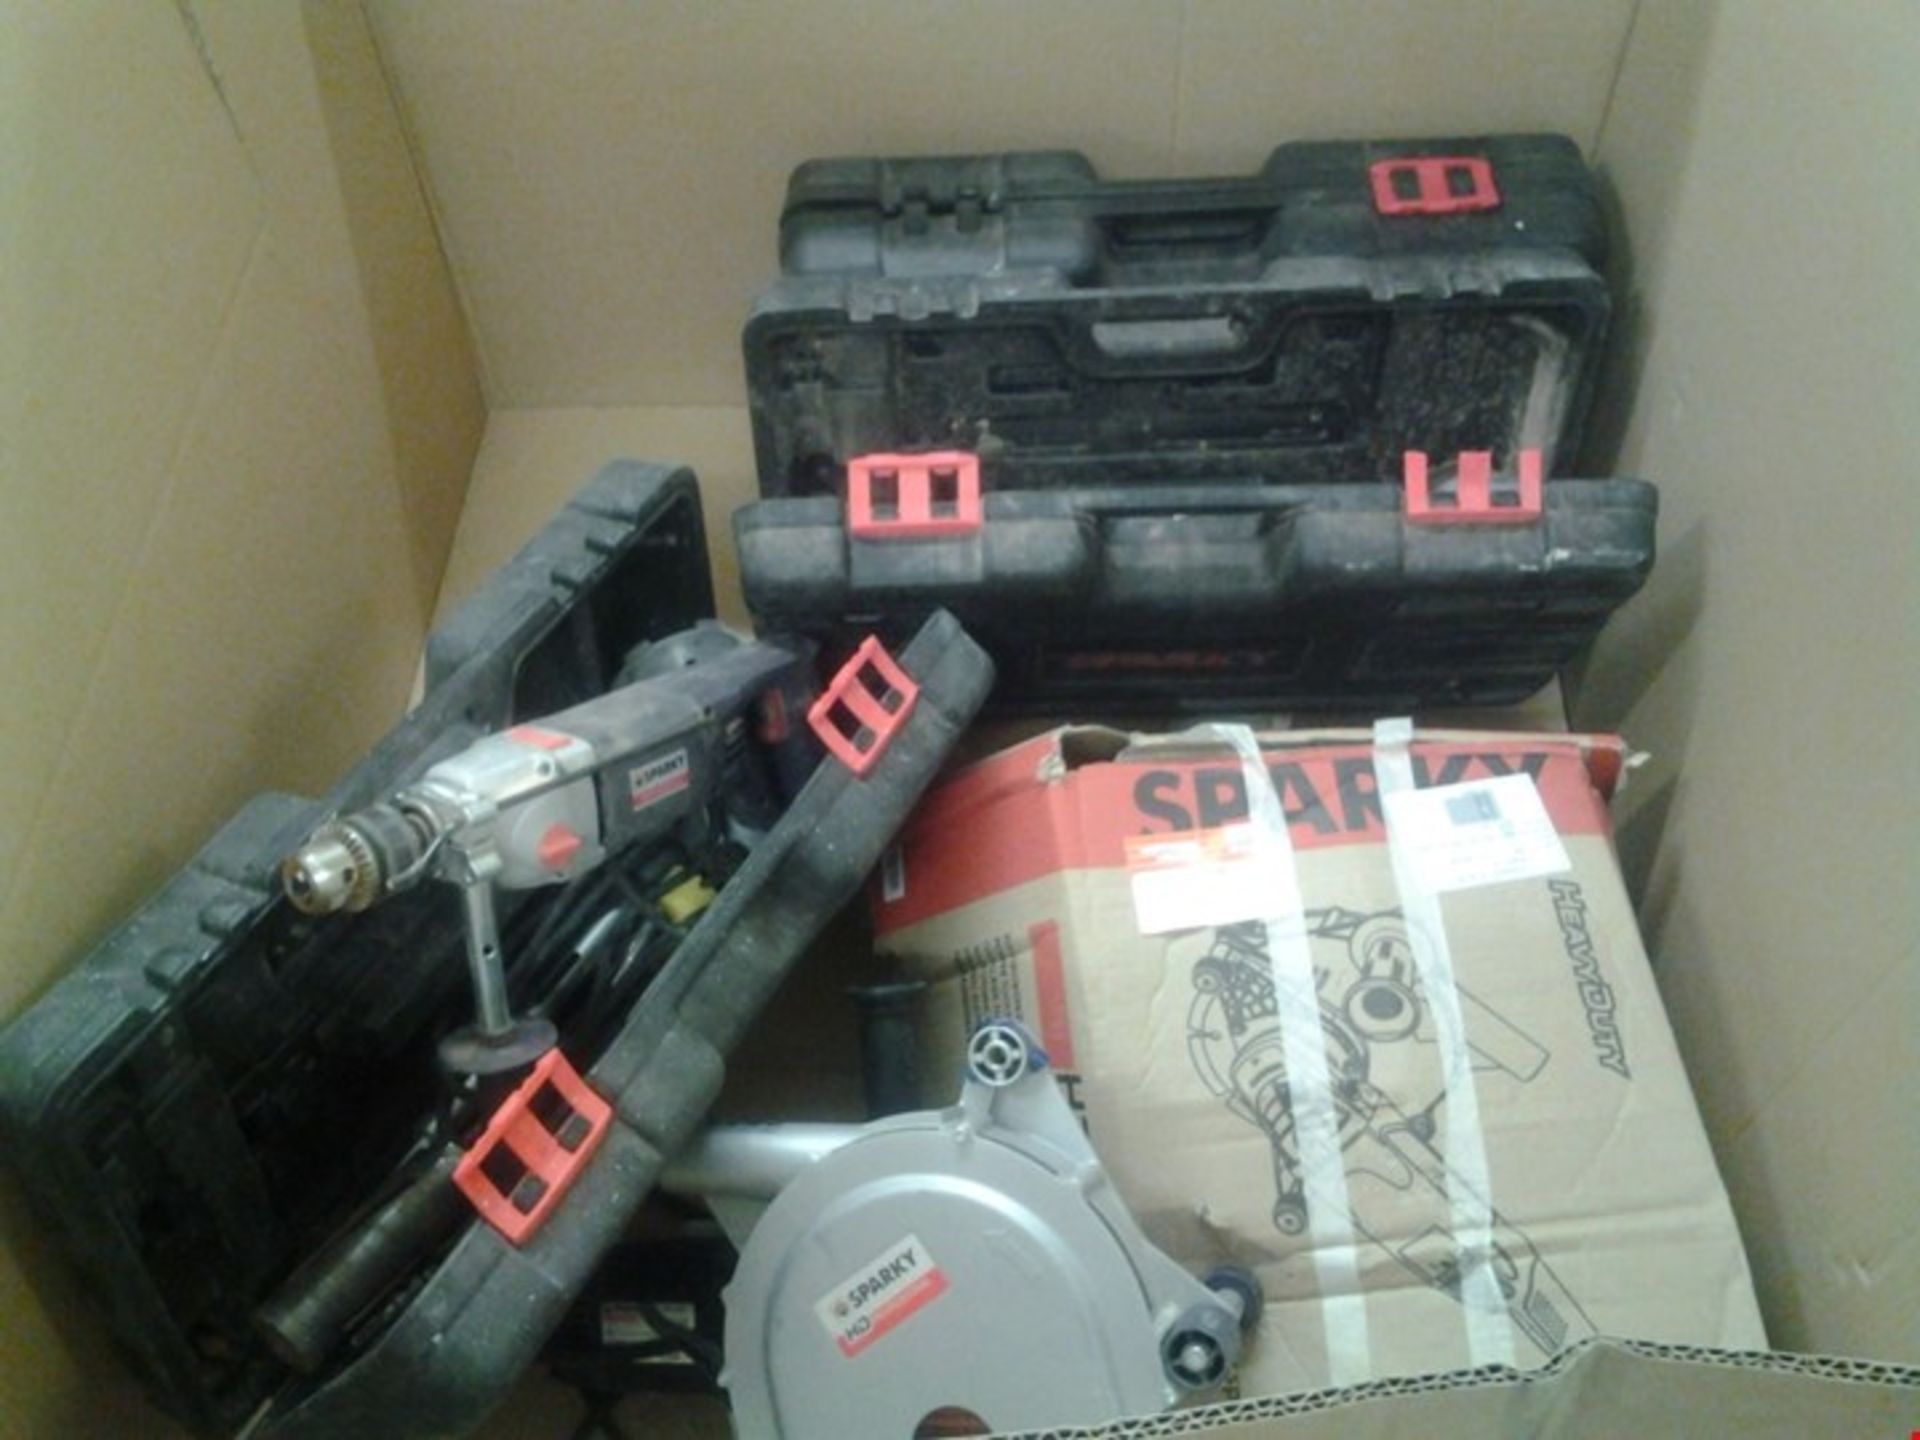 PALLET OF ASSORTED POWER TOOLS INCLUDING SPARKY HEAVY DUTY CIRCULAR SAWS, SPARKY HEAVY DUTY POW...